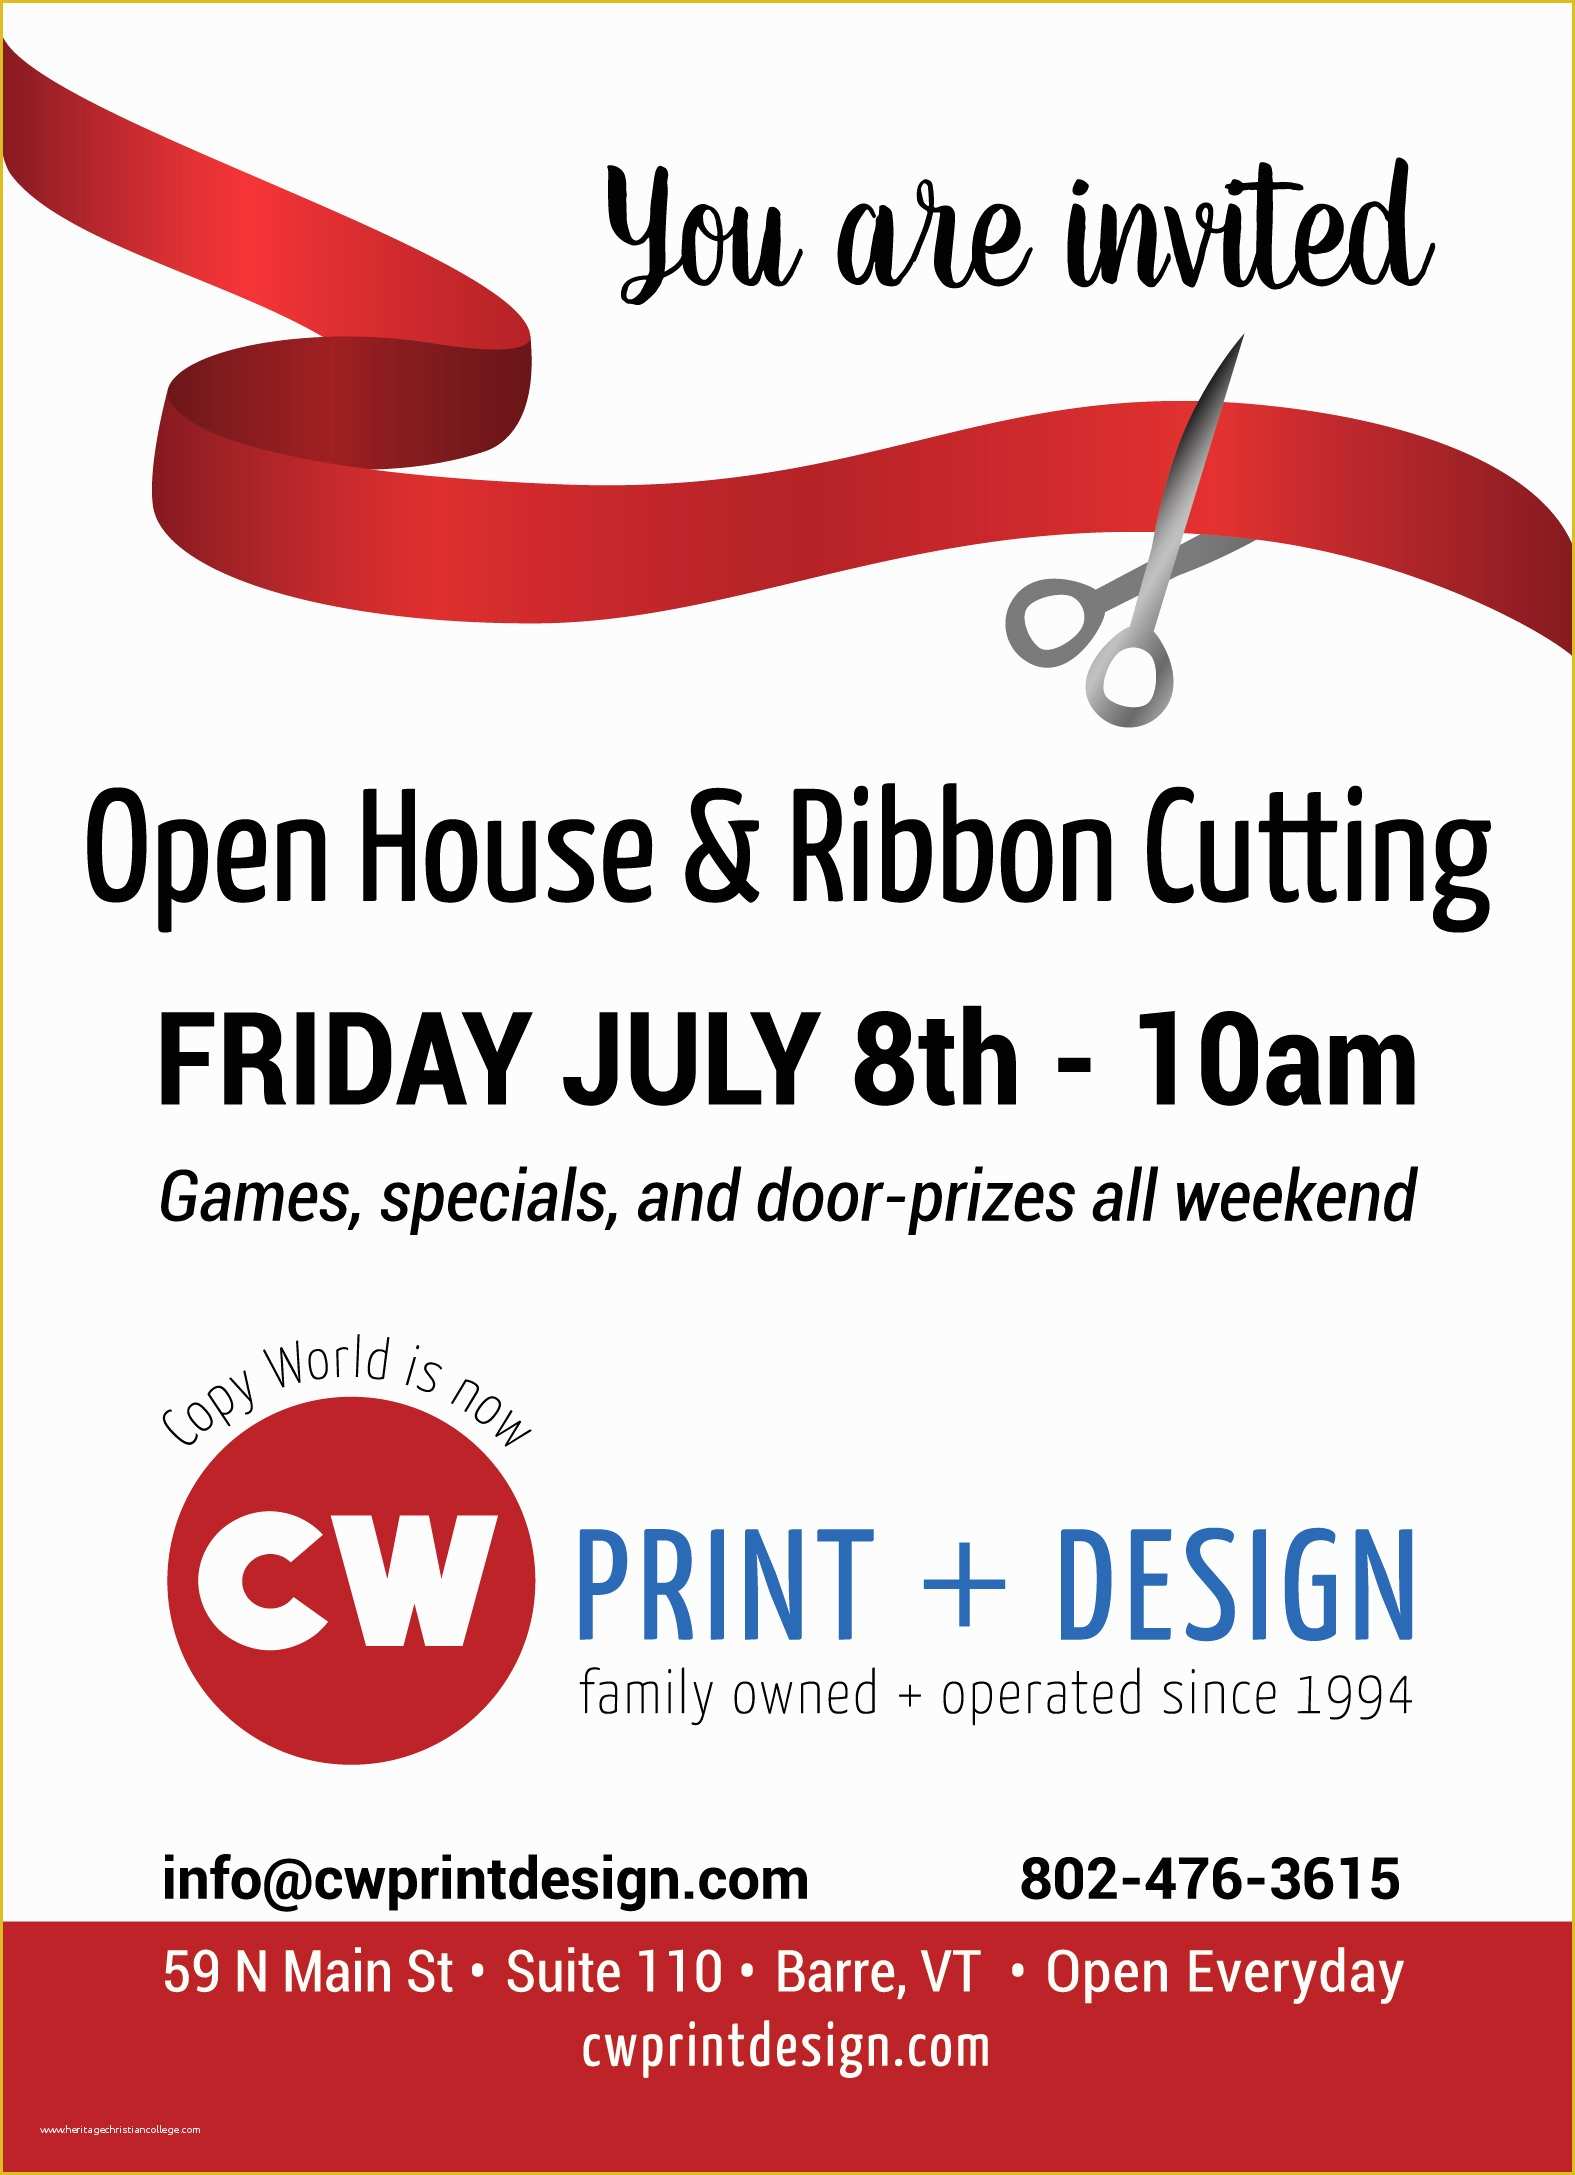 Free Ribbon Cutting Template Of Ribbon Cutting Friday July 8th 10am Copy World is now